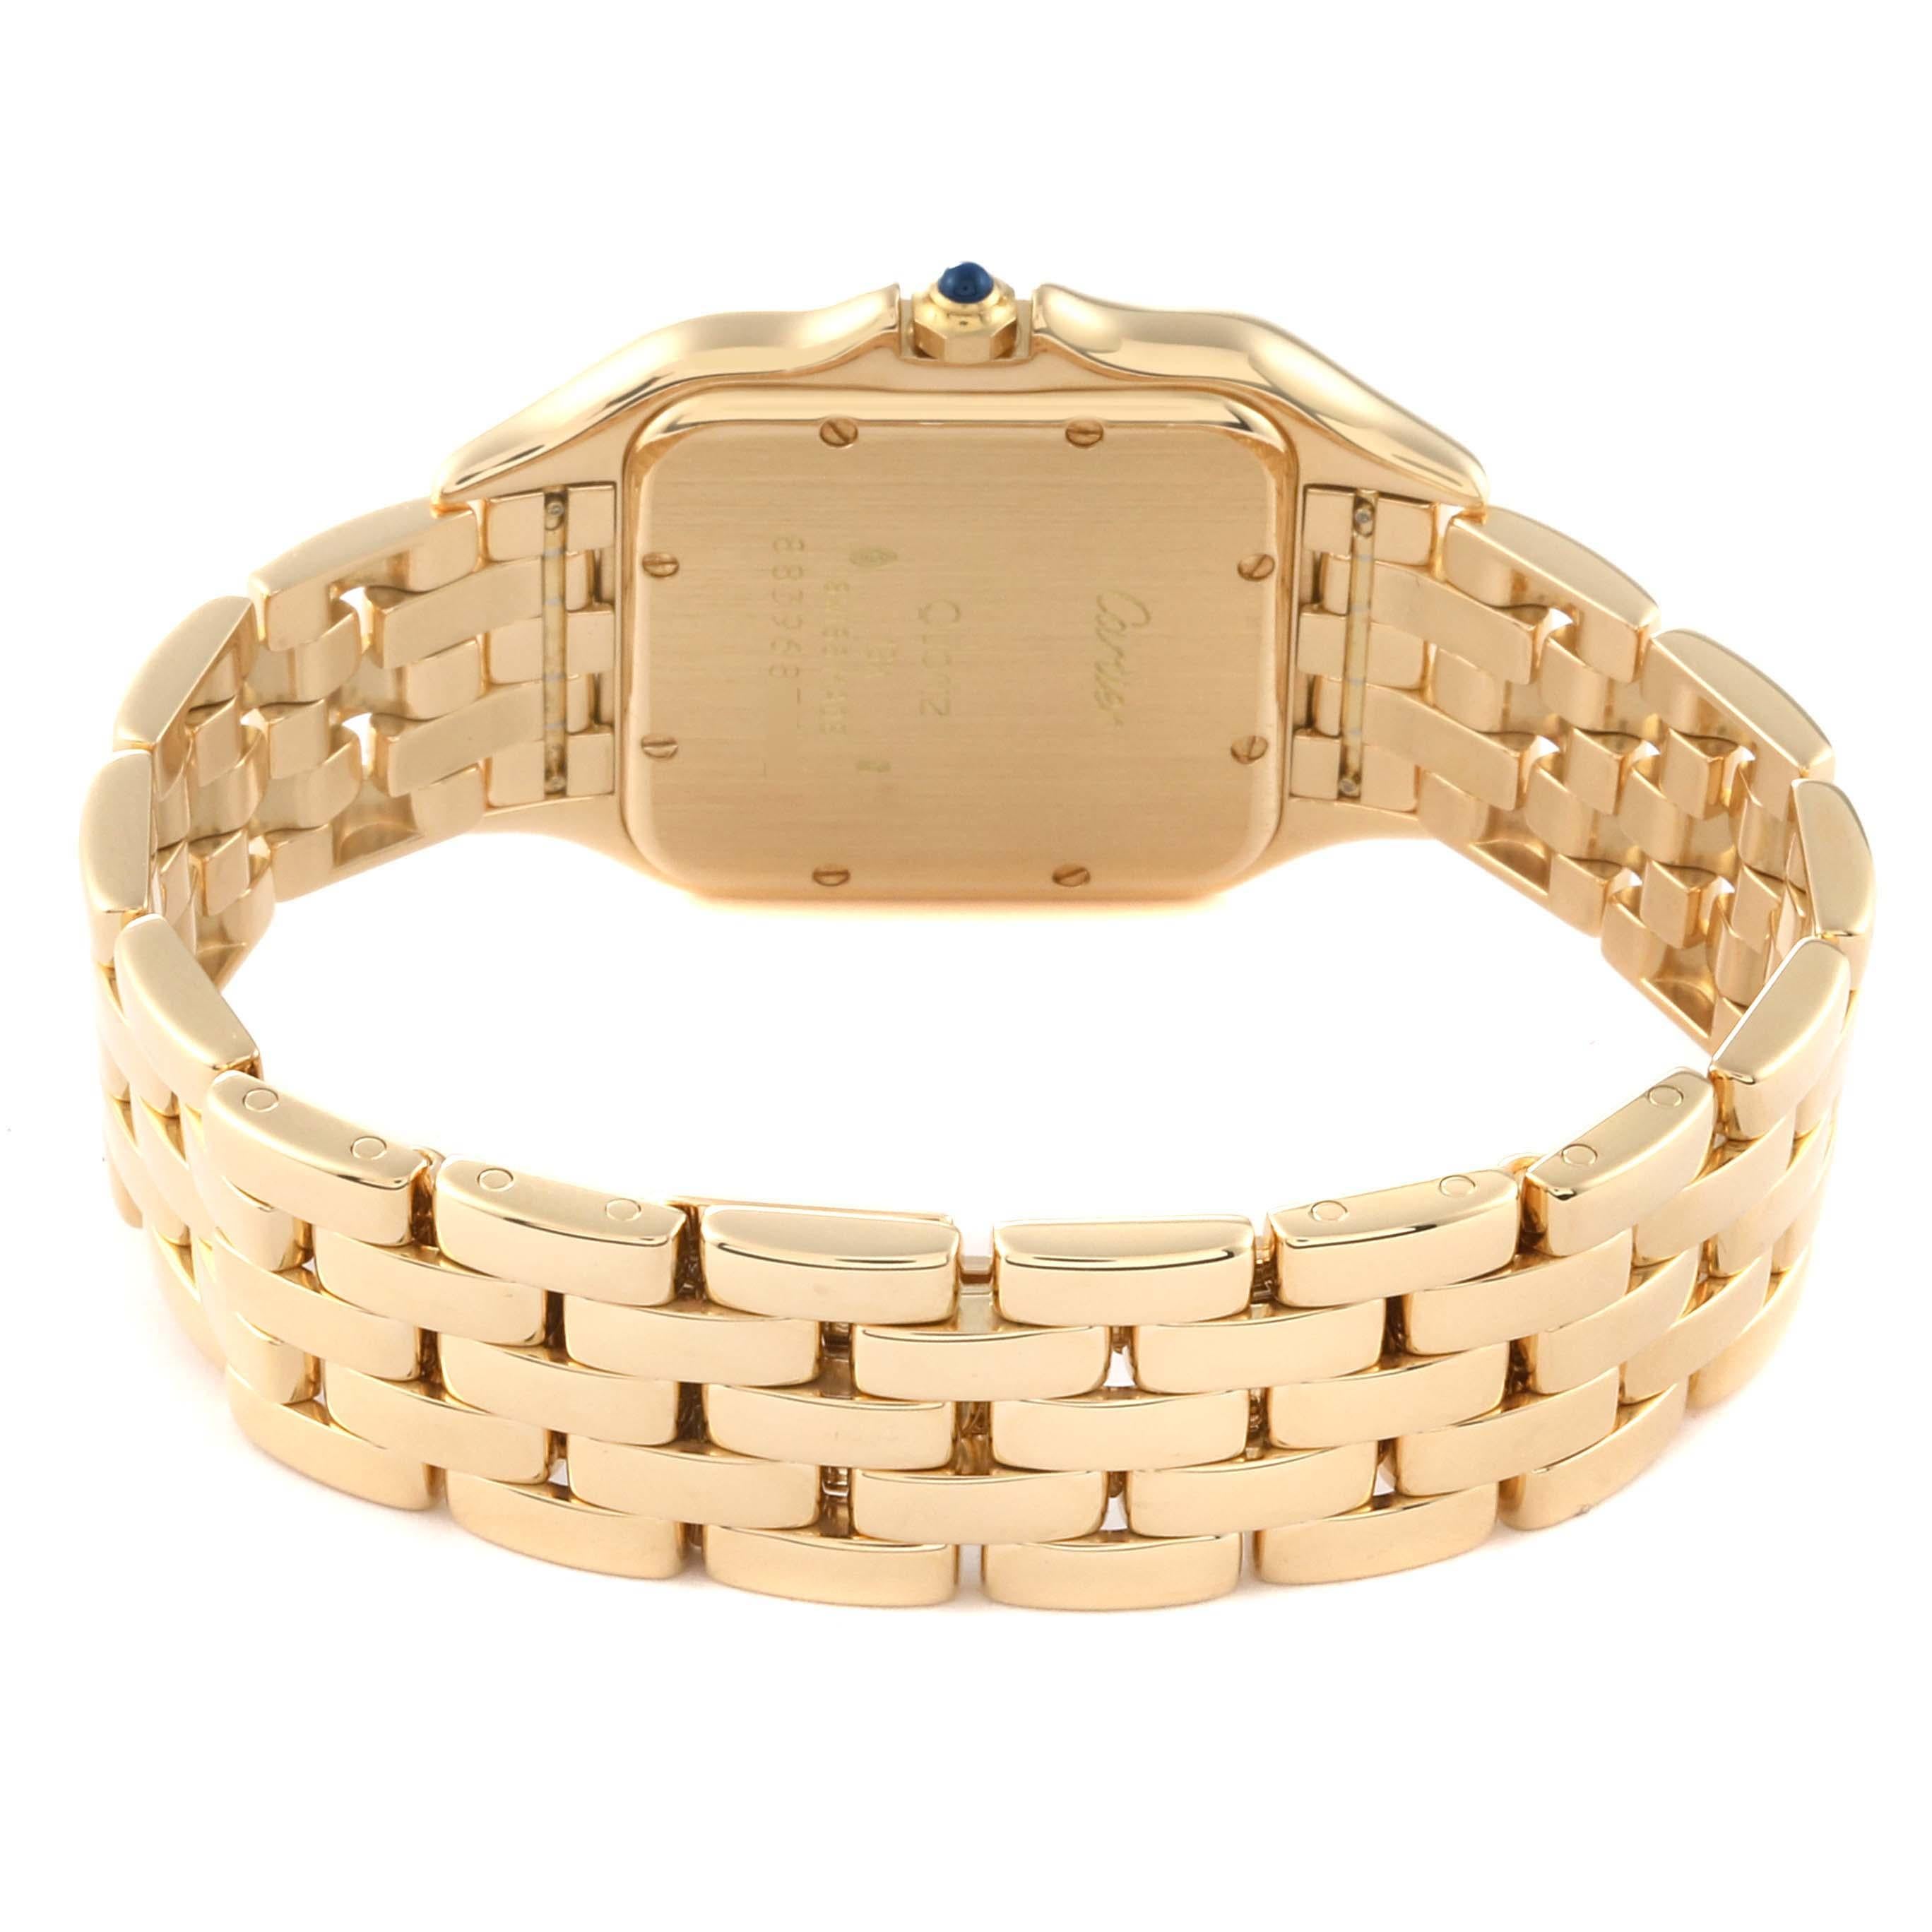 Cartier Panthere XL Yellow Gold Mens Watch W25014B9 In Good Condition For Sale In Atlanta, GA